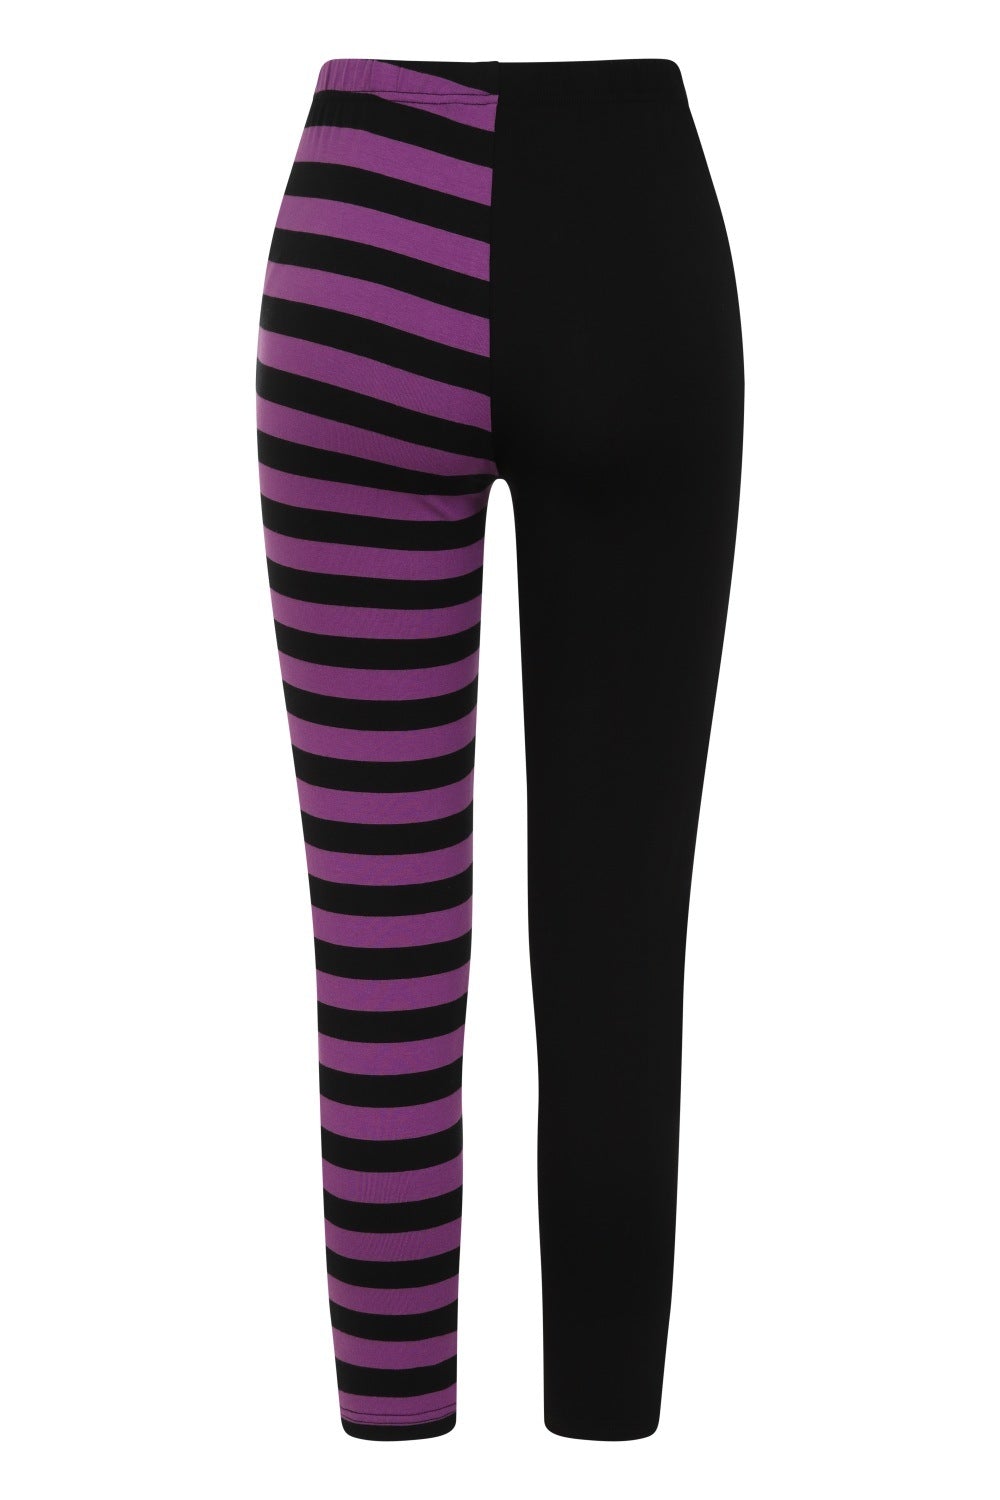 Back of High waisted leggings with one black leg and one purple striped leg. 